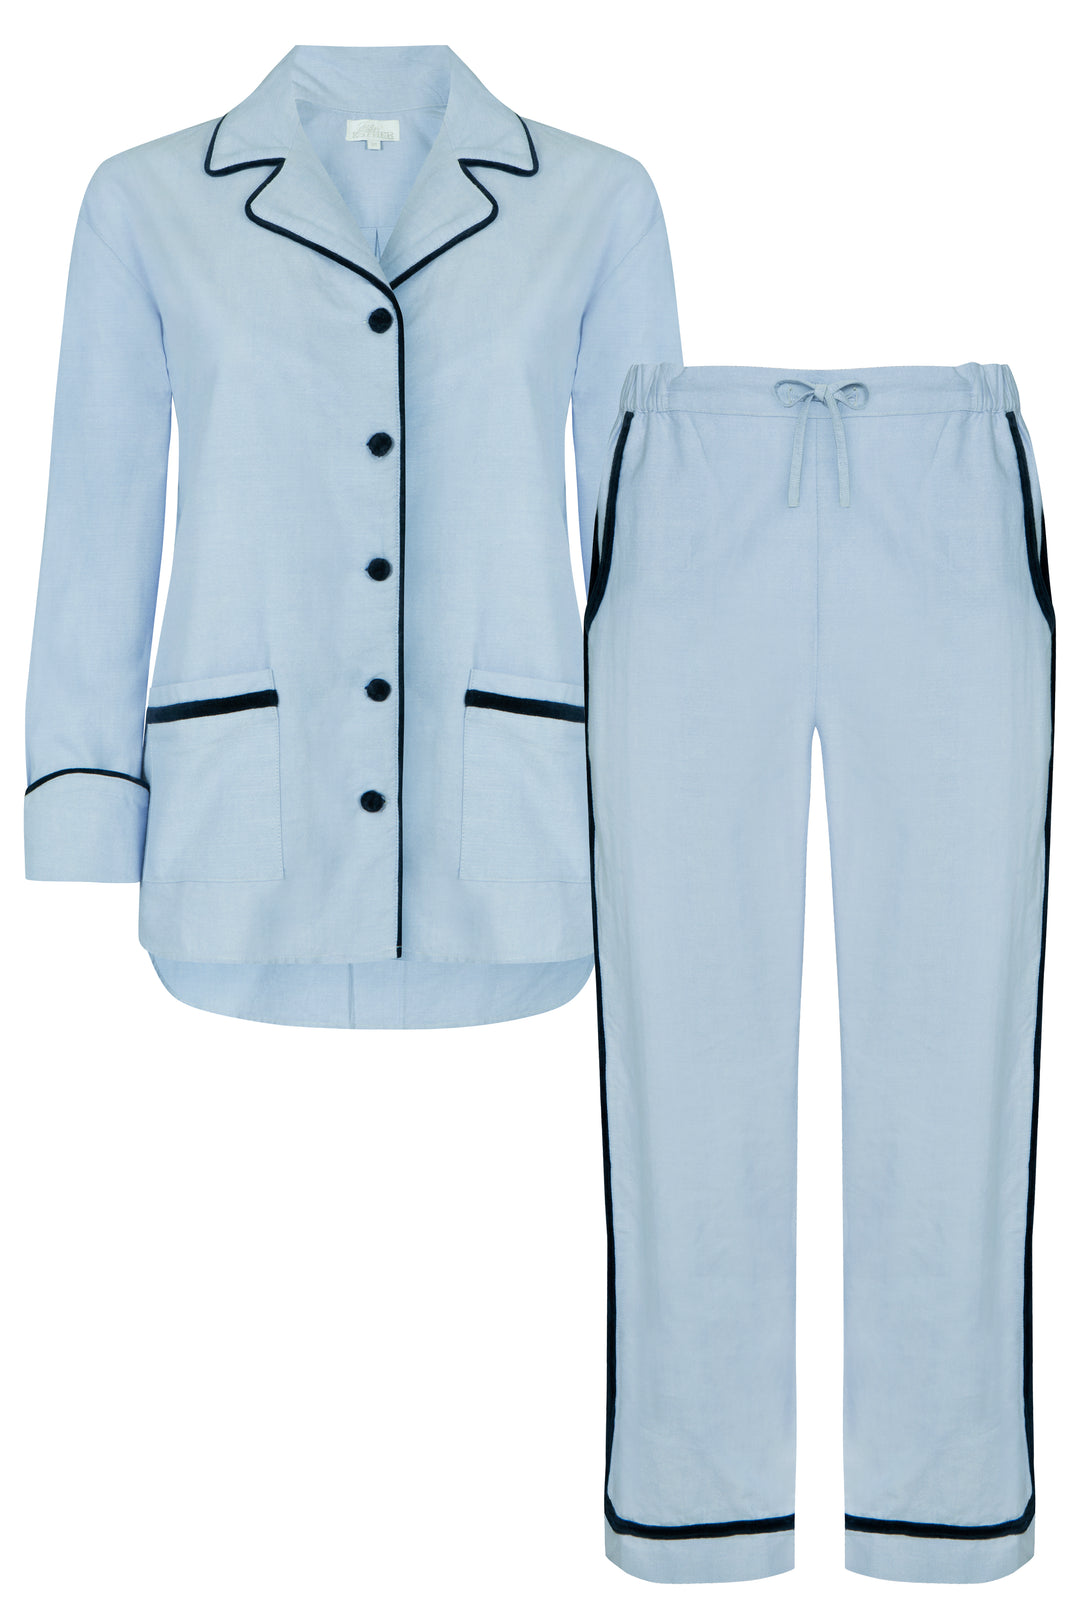 Luxury blue cotton chambray loungewear set with velvet trims and piping. The loungewear set features velvet covered buttons and pockets on both the jacket and trousers. Ultimate luxury loungewear!